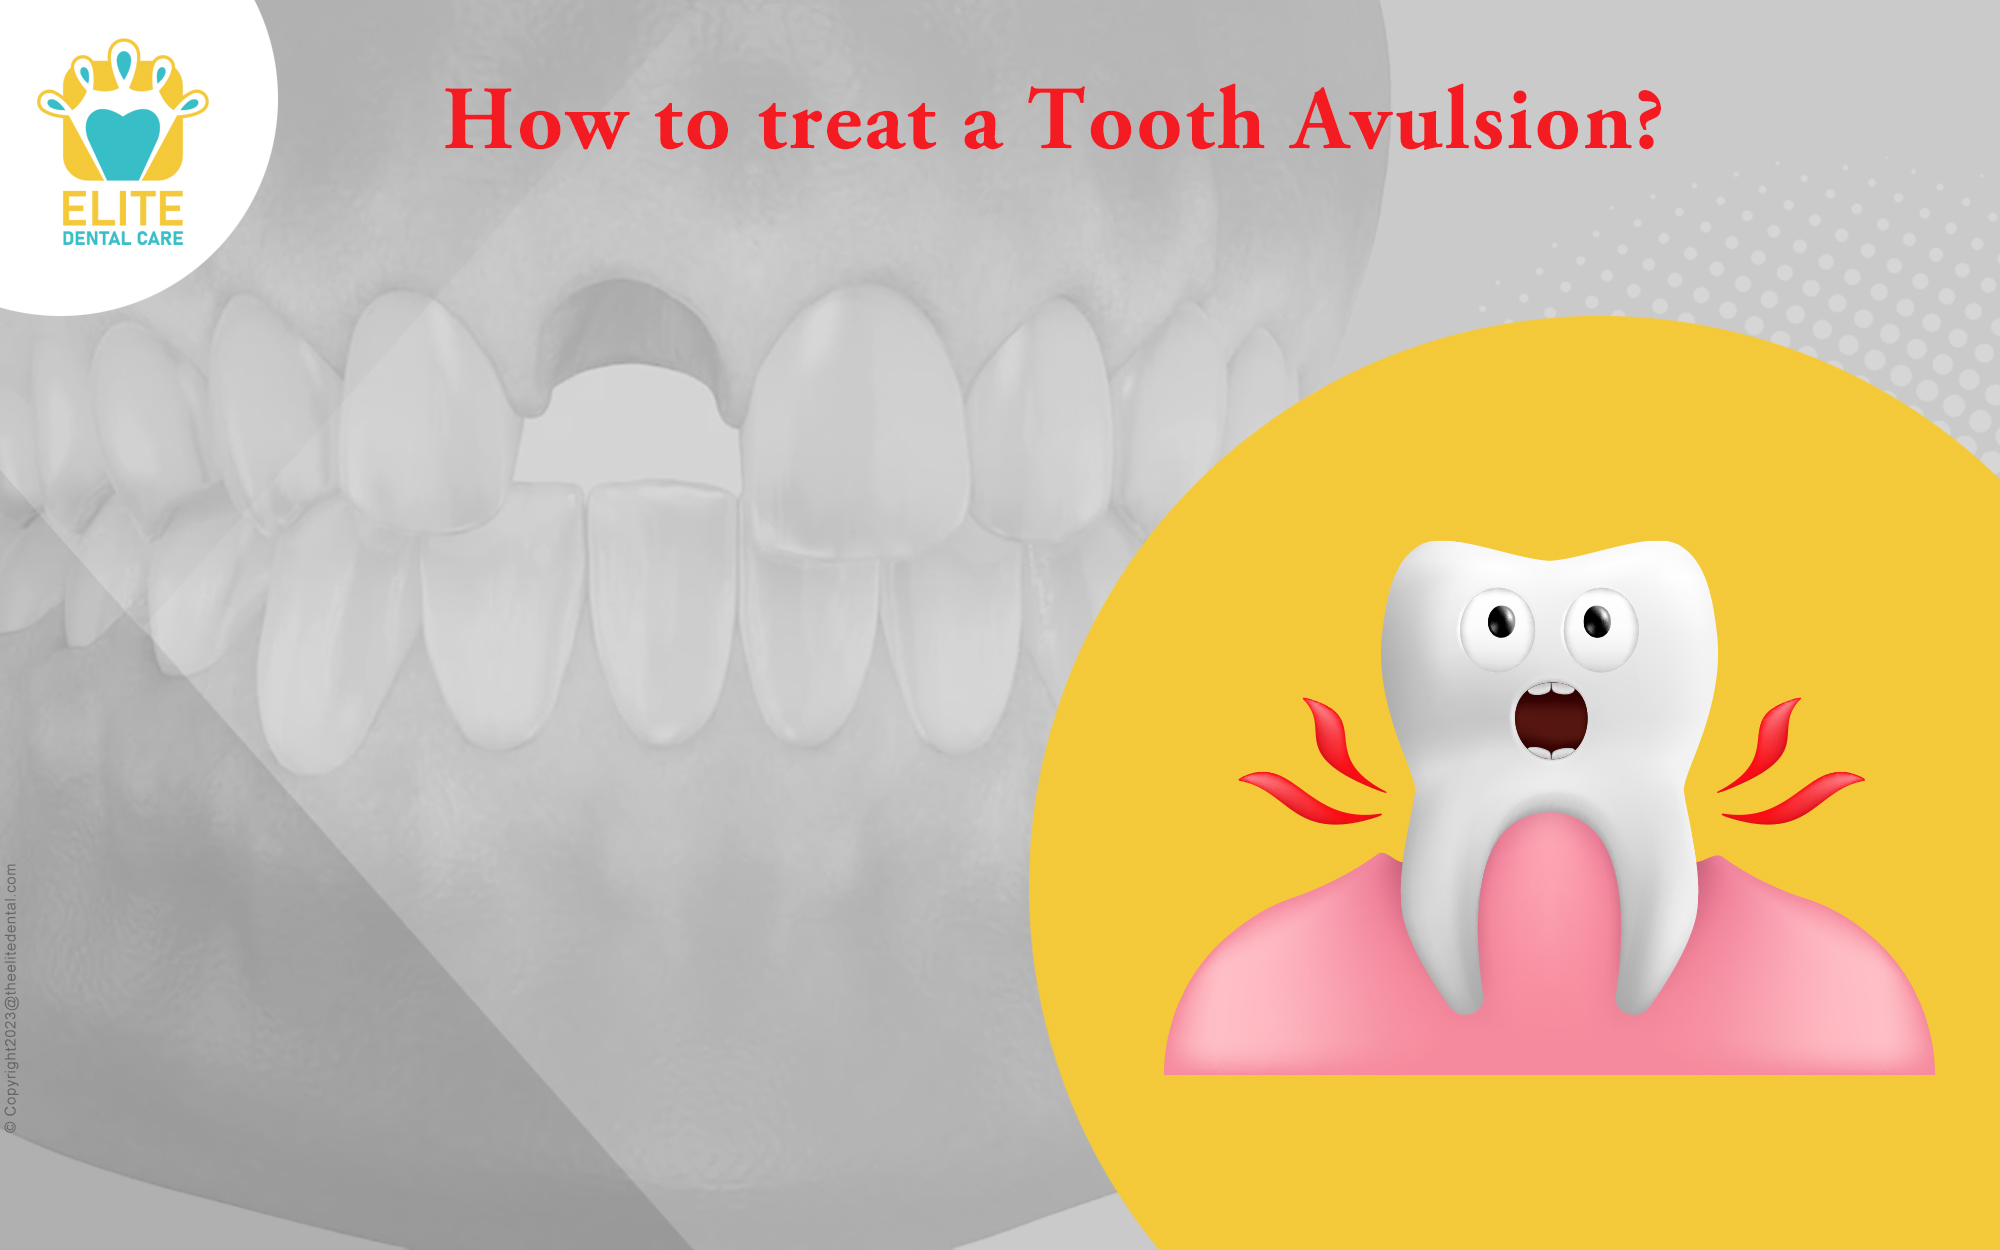 HOW TO TREAT A TOOTH AVULSION